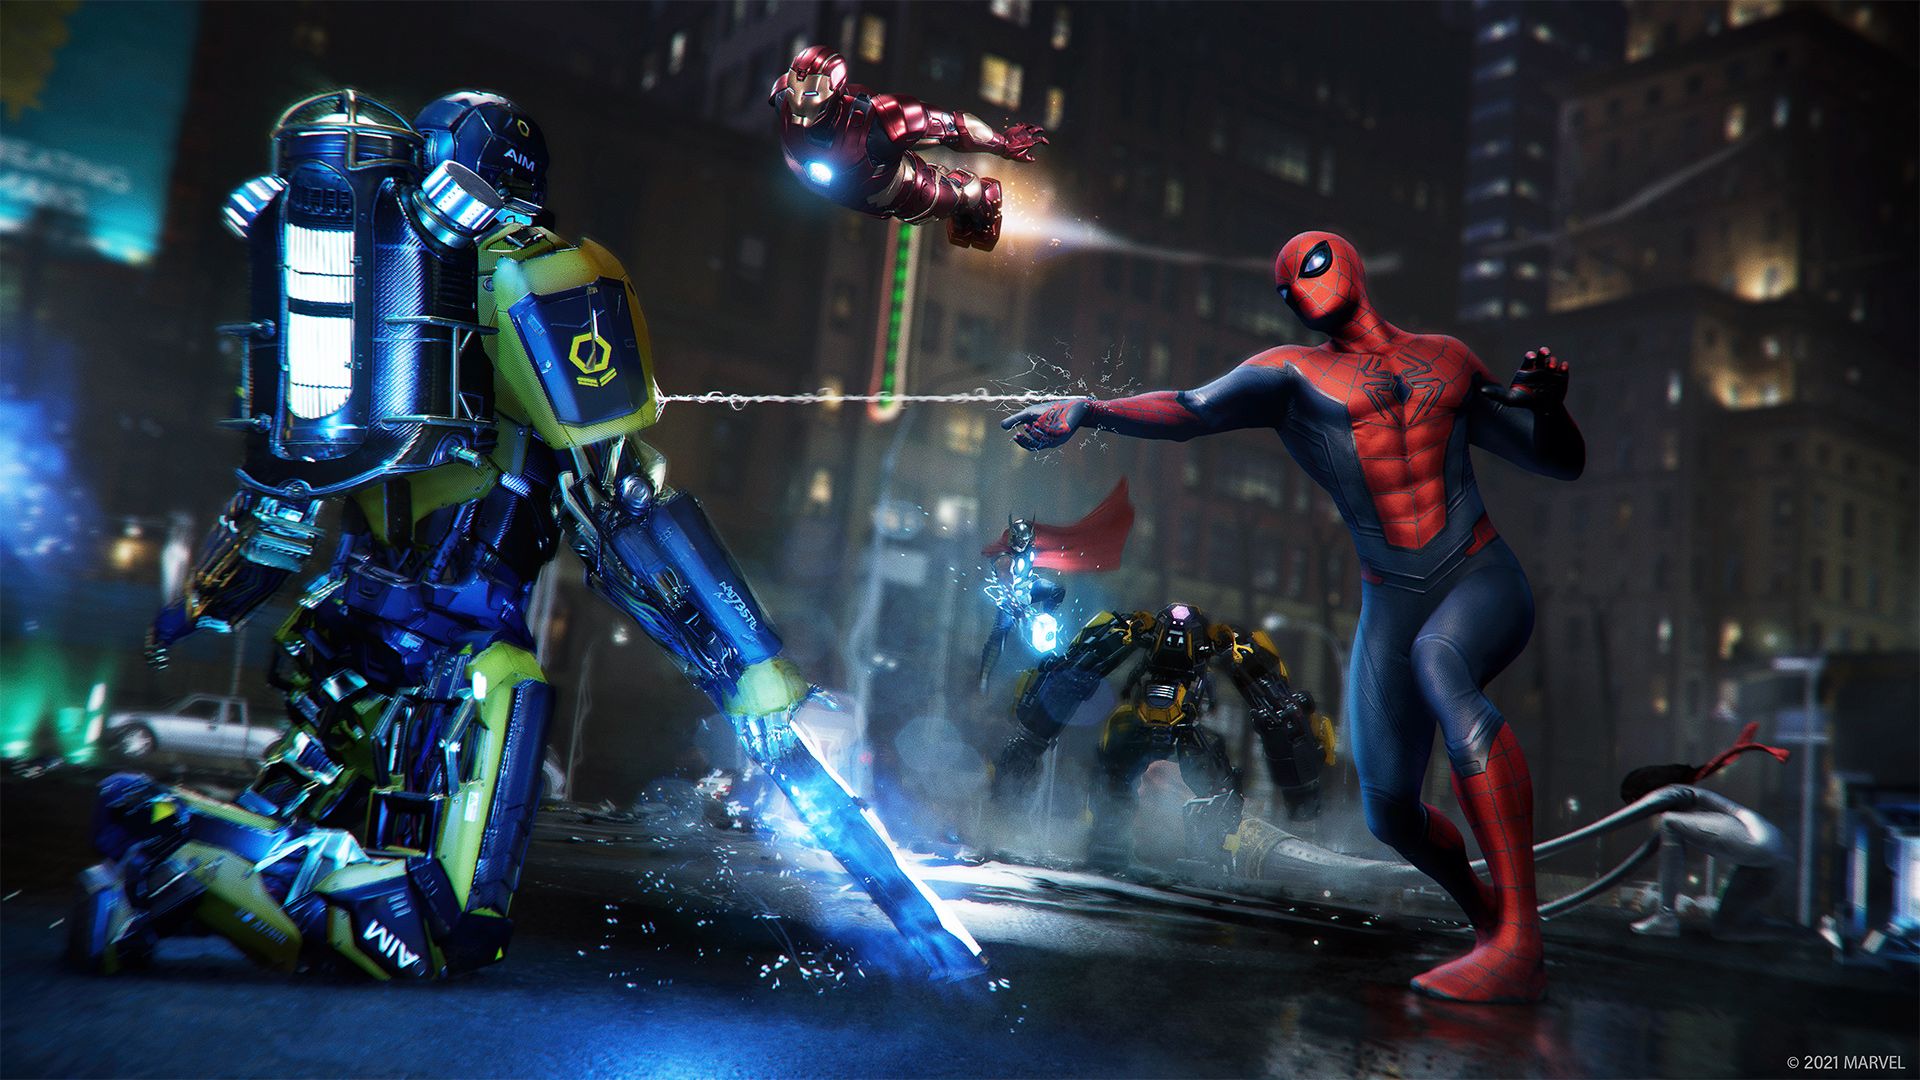 Spider-Man and the Avengers take on AIM.